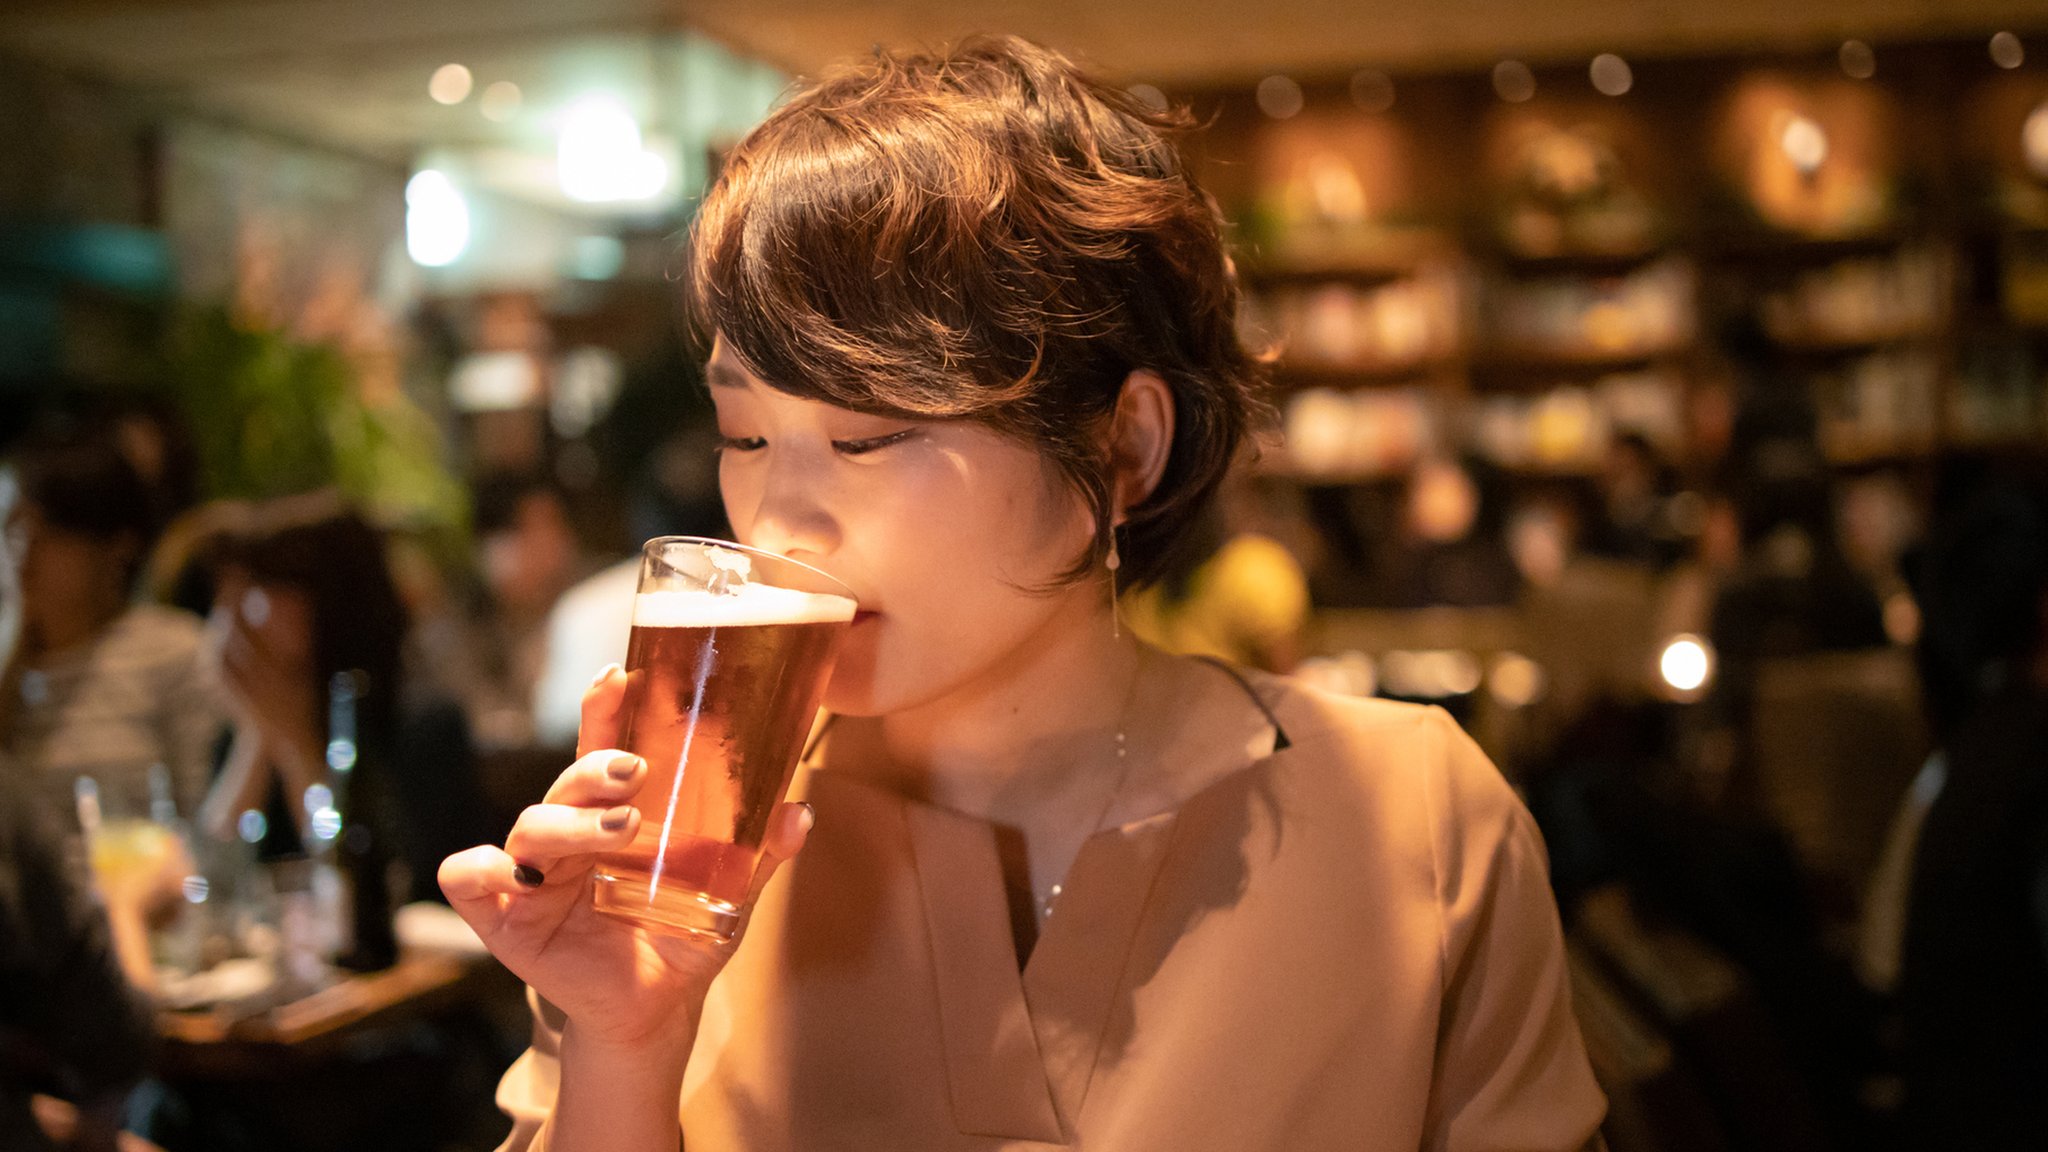 Japan urges its young people to drink more to boost economy picture